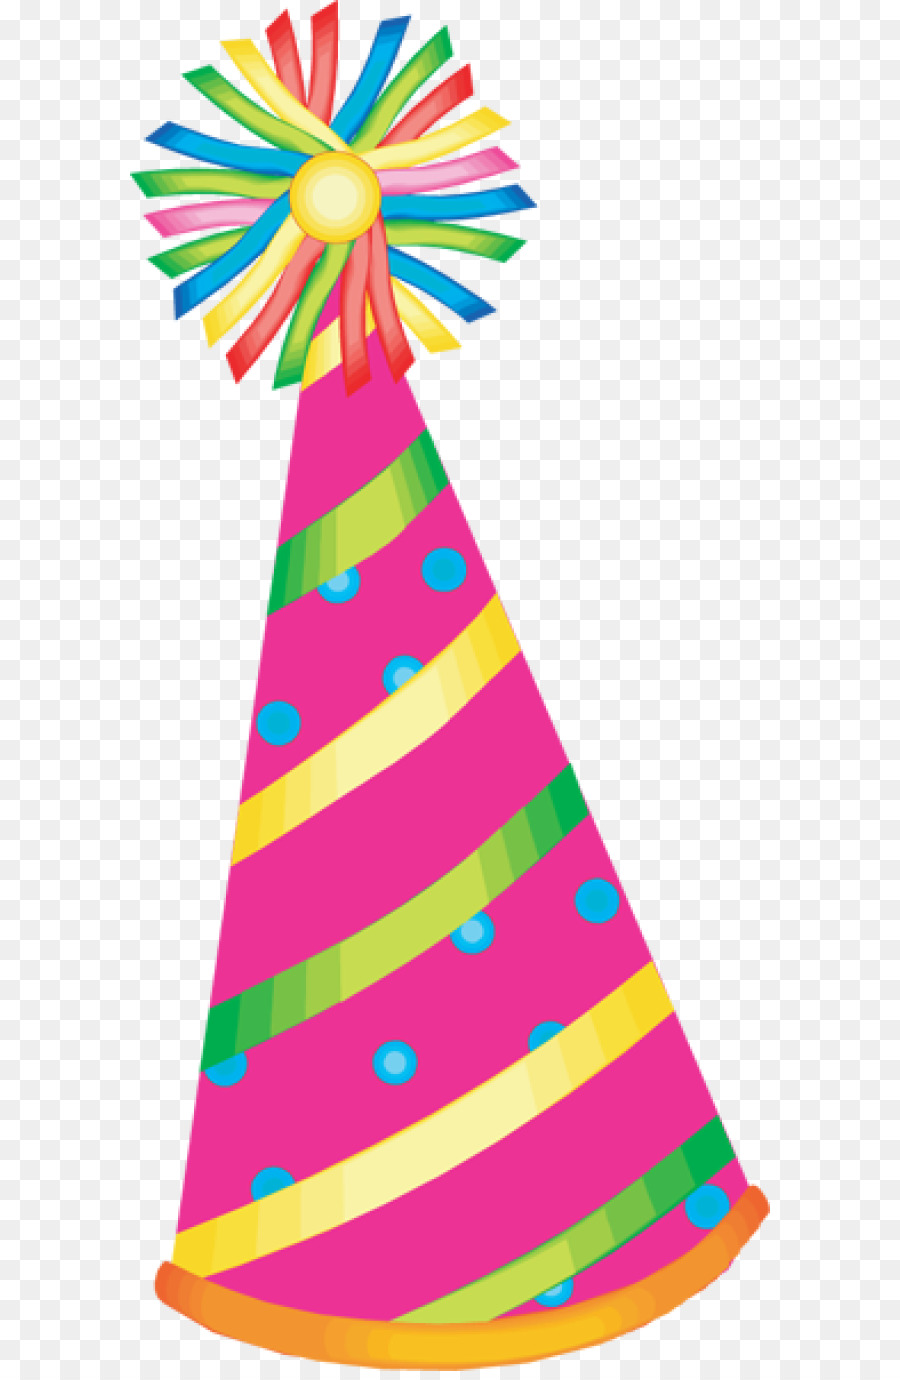 Free Party Hat Clipart Transparent Background, Download Free Party Hat